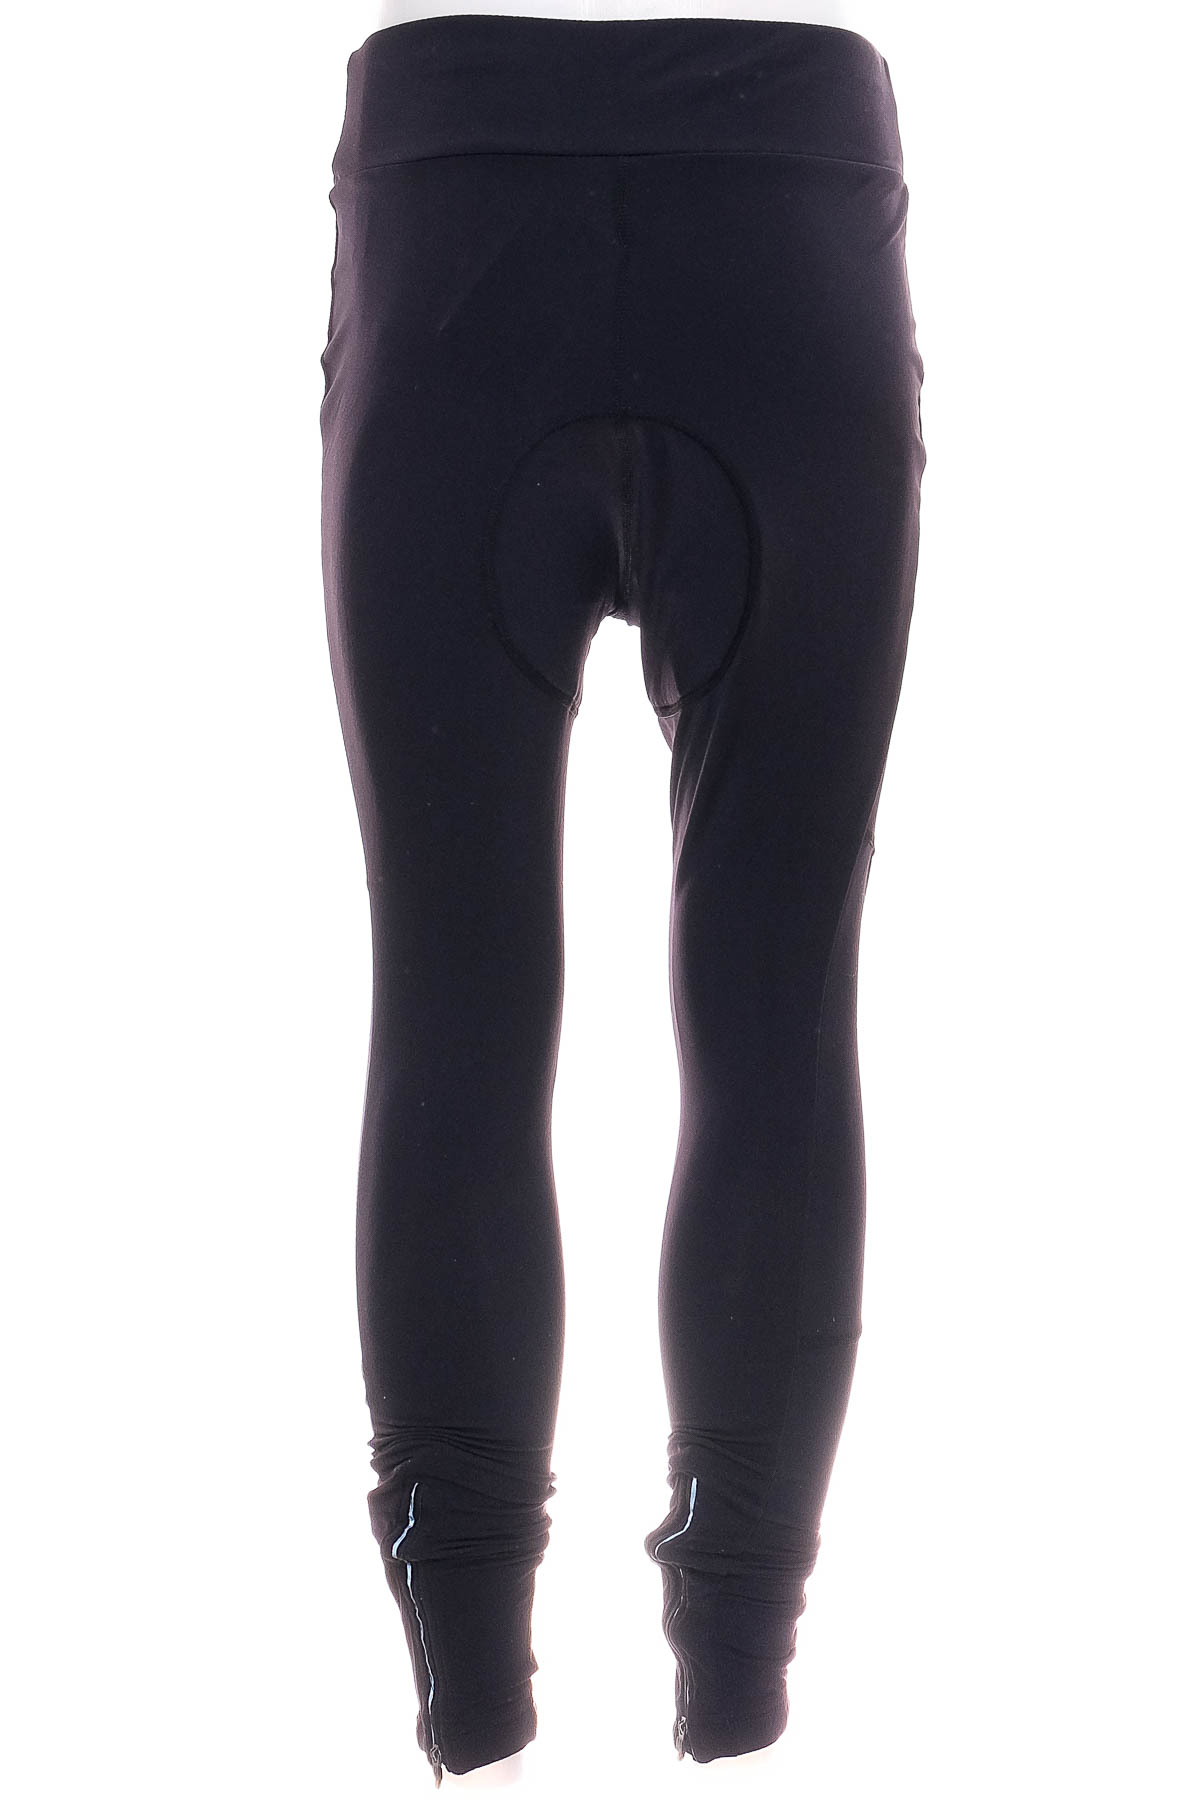 Man's cycling tights - Active Touch - 1